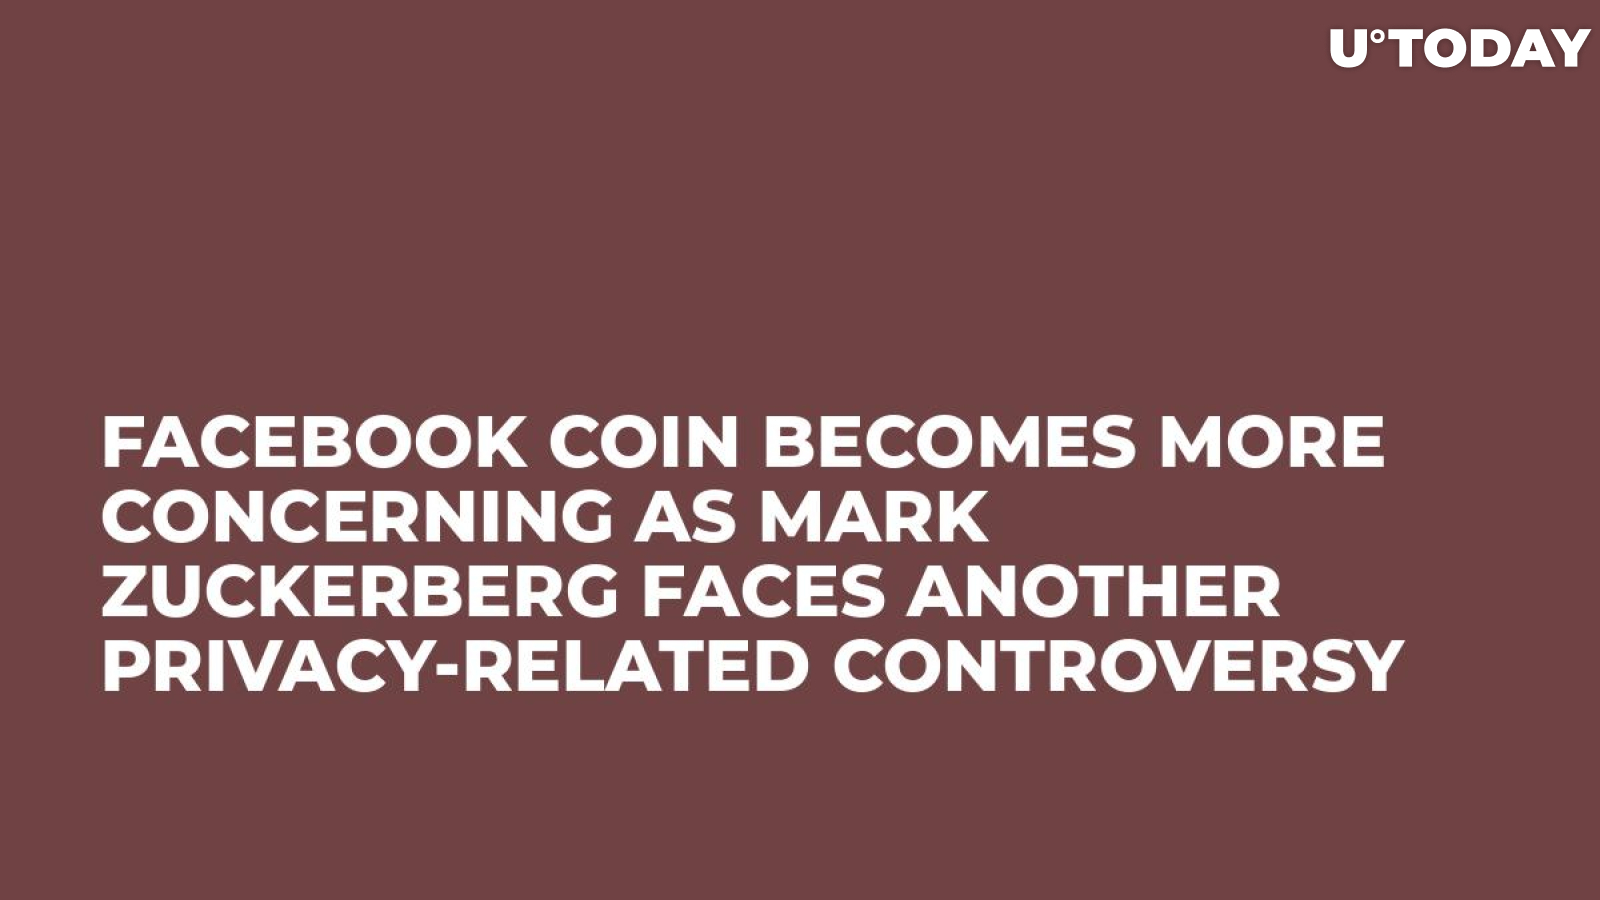 Facebook Coin Becomes More Concerning as Mark Zuckerberg Faces Another Privacy-Related Controversy 